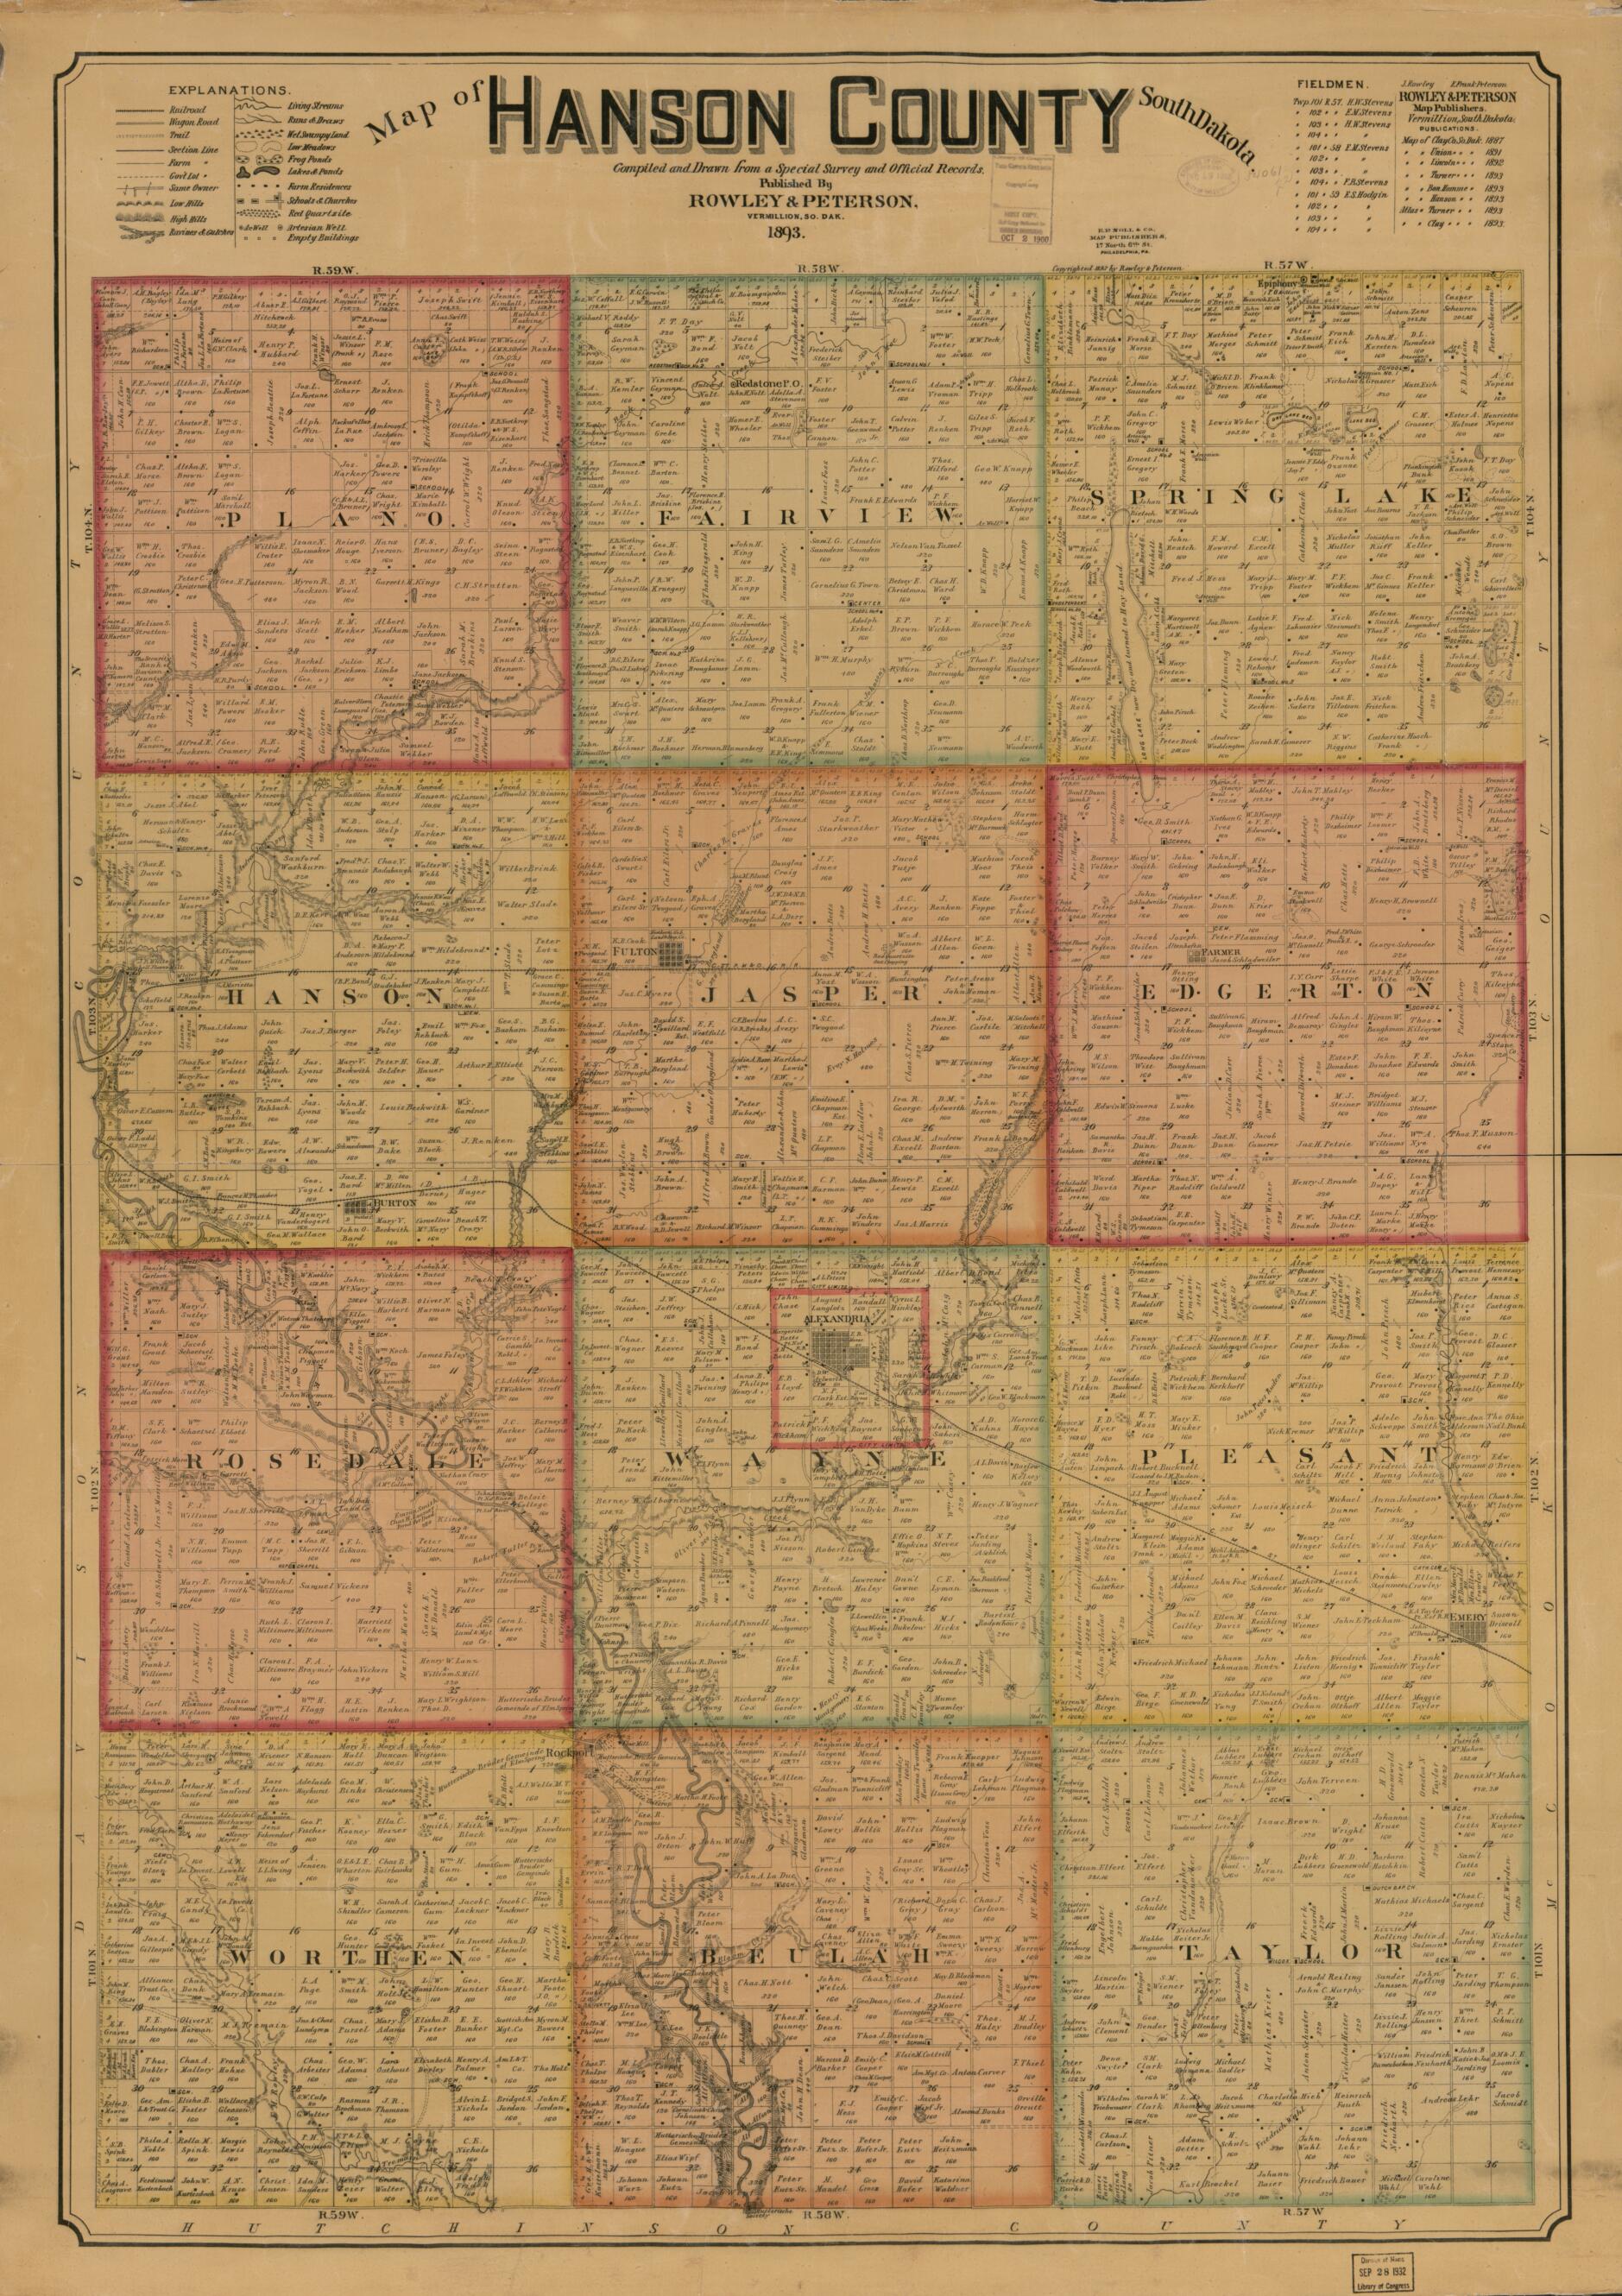 This old map of Map of Hanson County, South Dakota : Compiled and Drawn from a Special Survey and Official Records from 1893 was created by  E.P. Noll &amp; Co,  Rowley &amp; Peterson in 1893